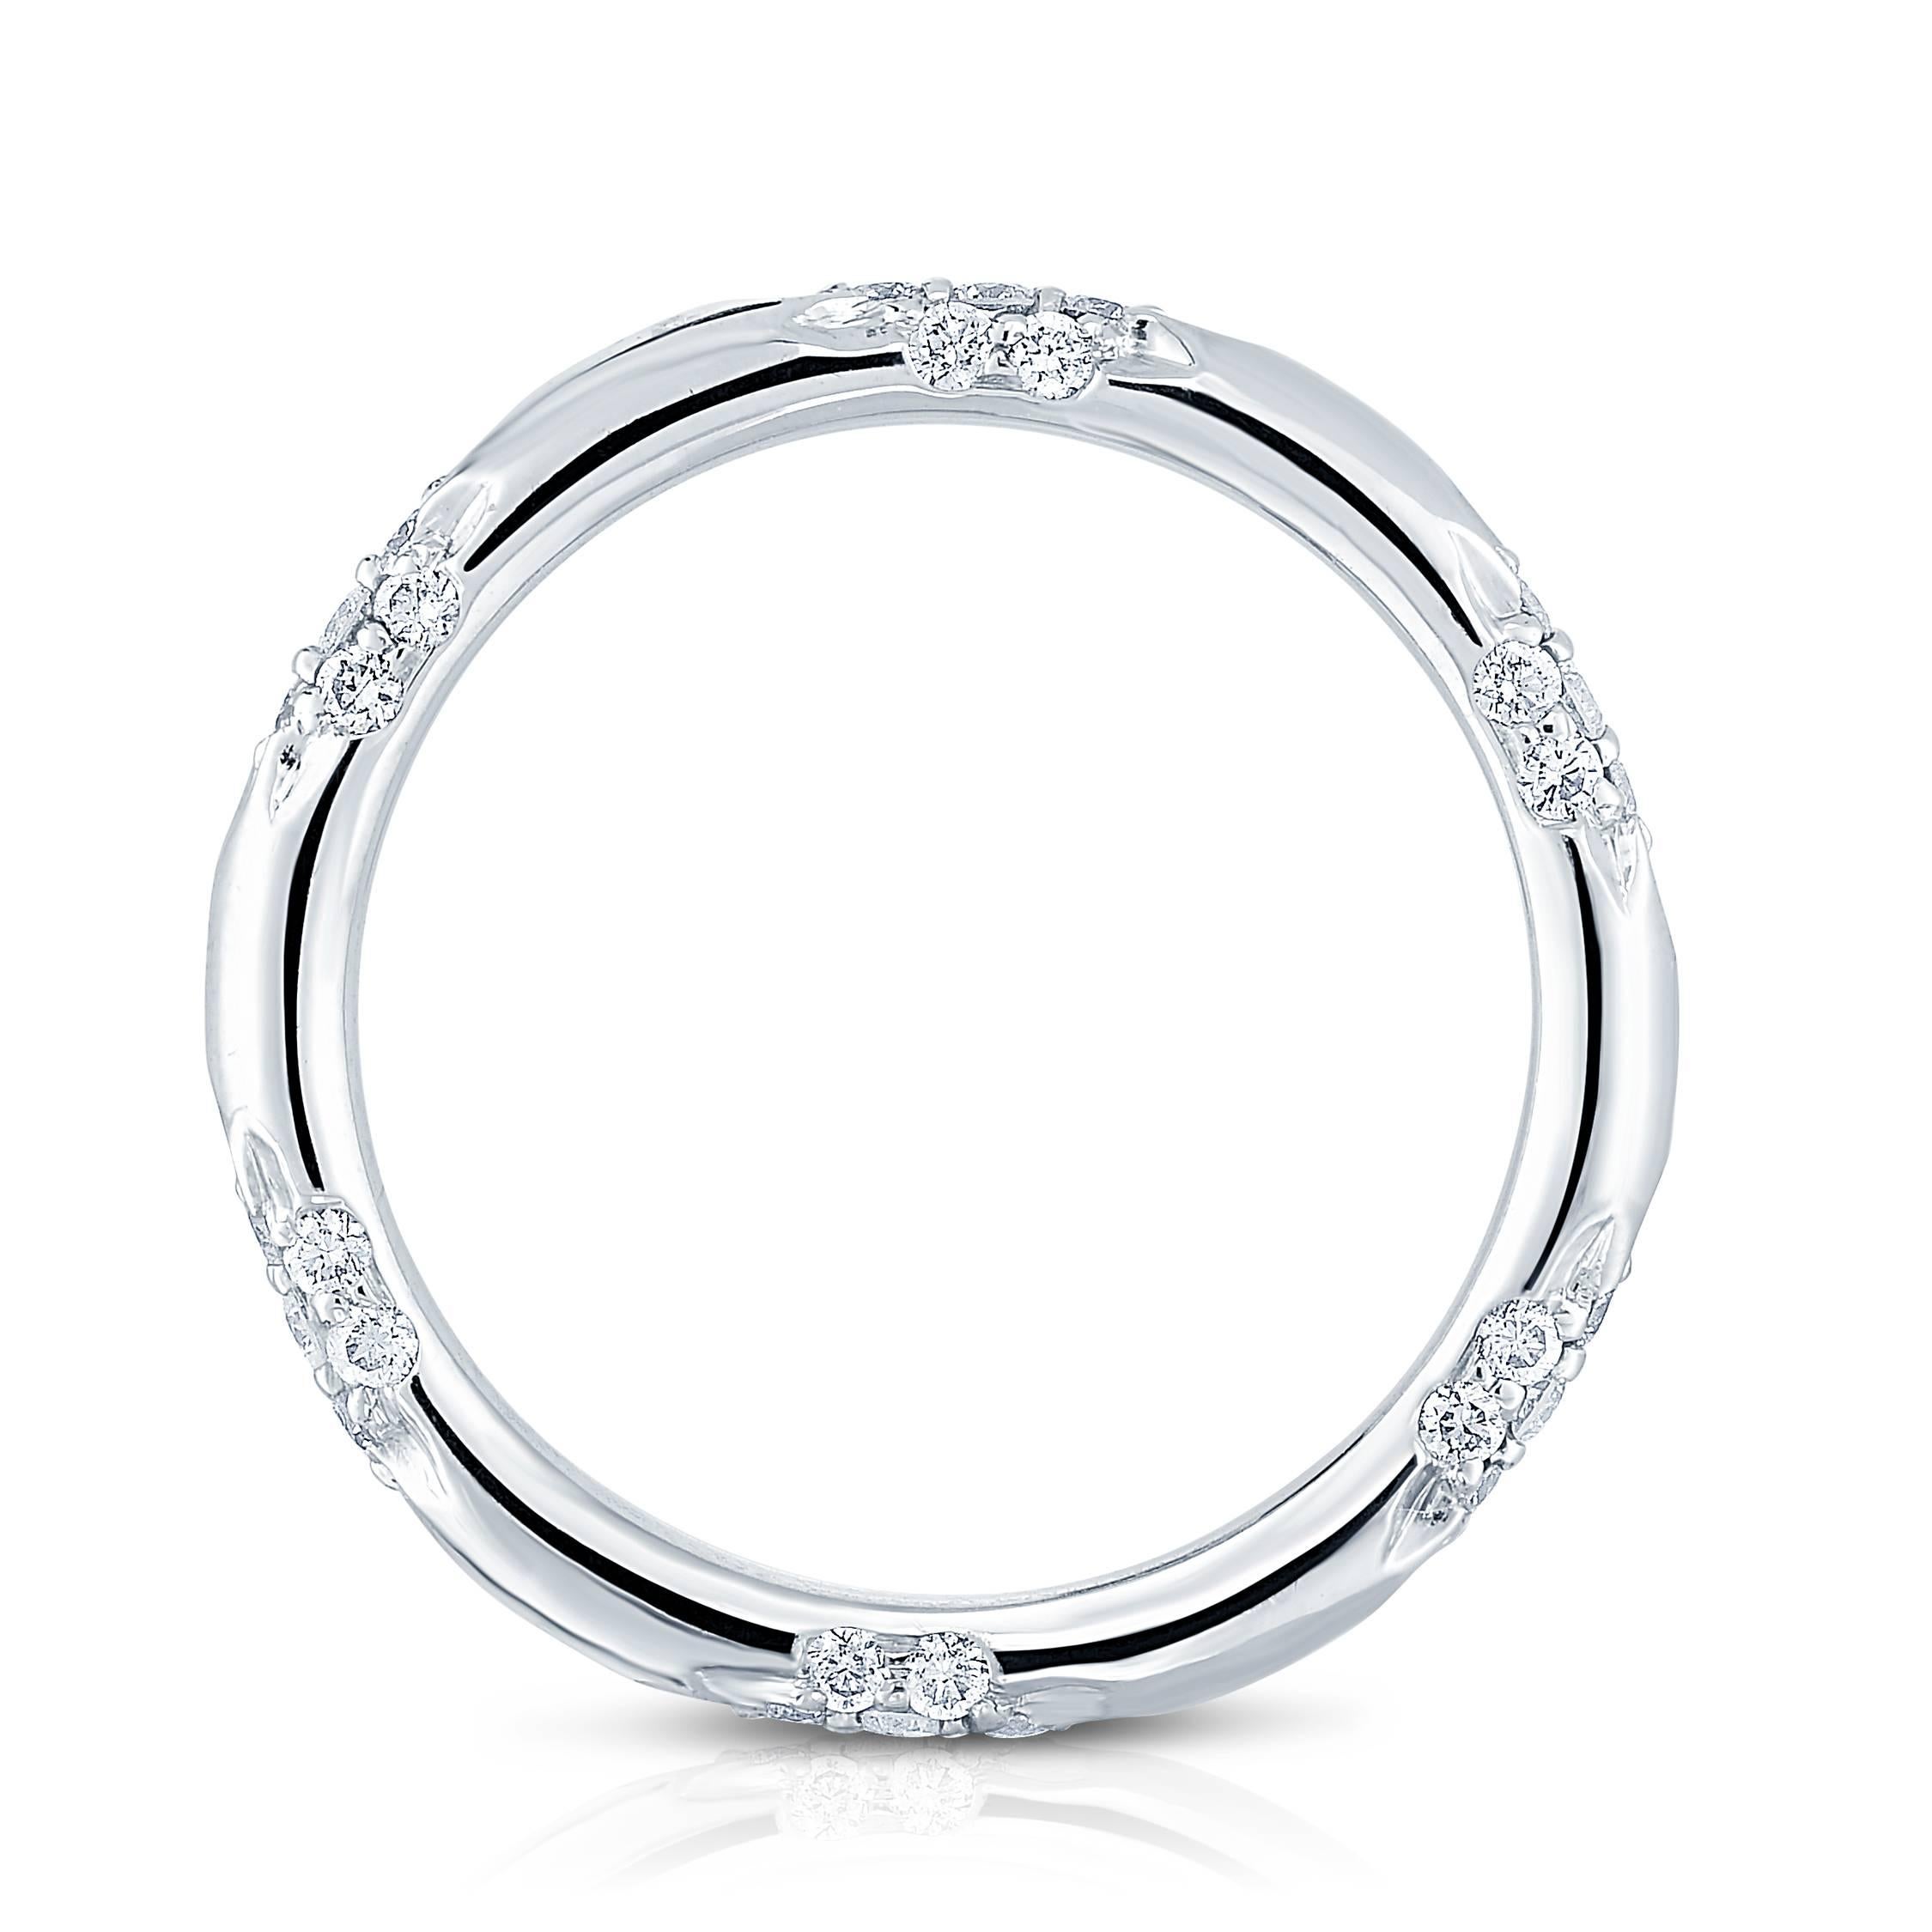 Marisa Perry Micro Pave 'Nesi' band is perfect for those deciding between a plain platinum wedding band and a micro pave wedding band. This ring also makes the perfect anniversary present, birthday gift or push present, especially for any April baby